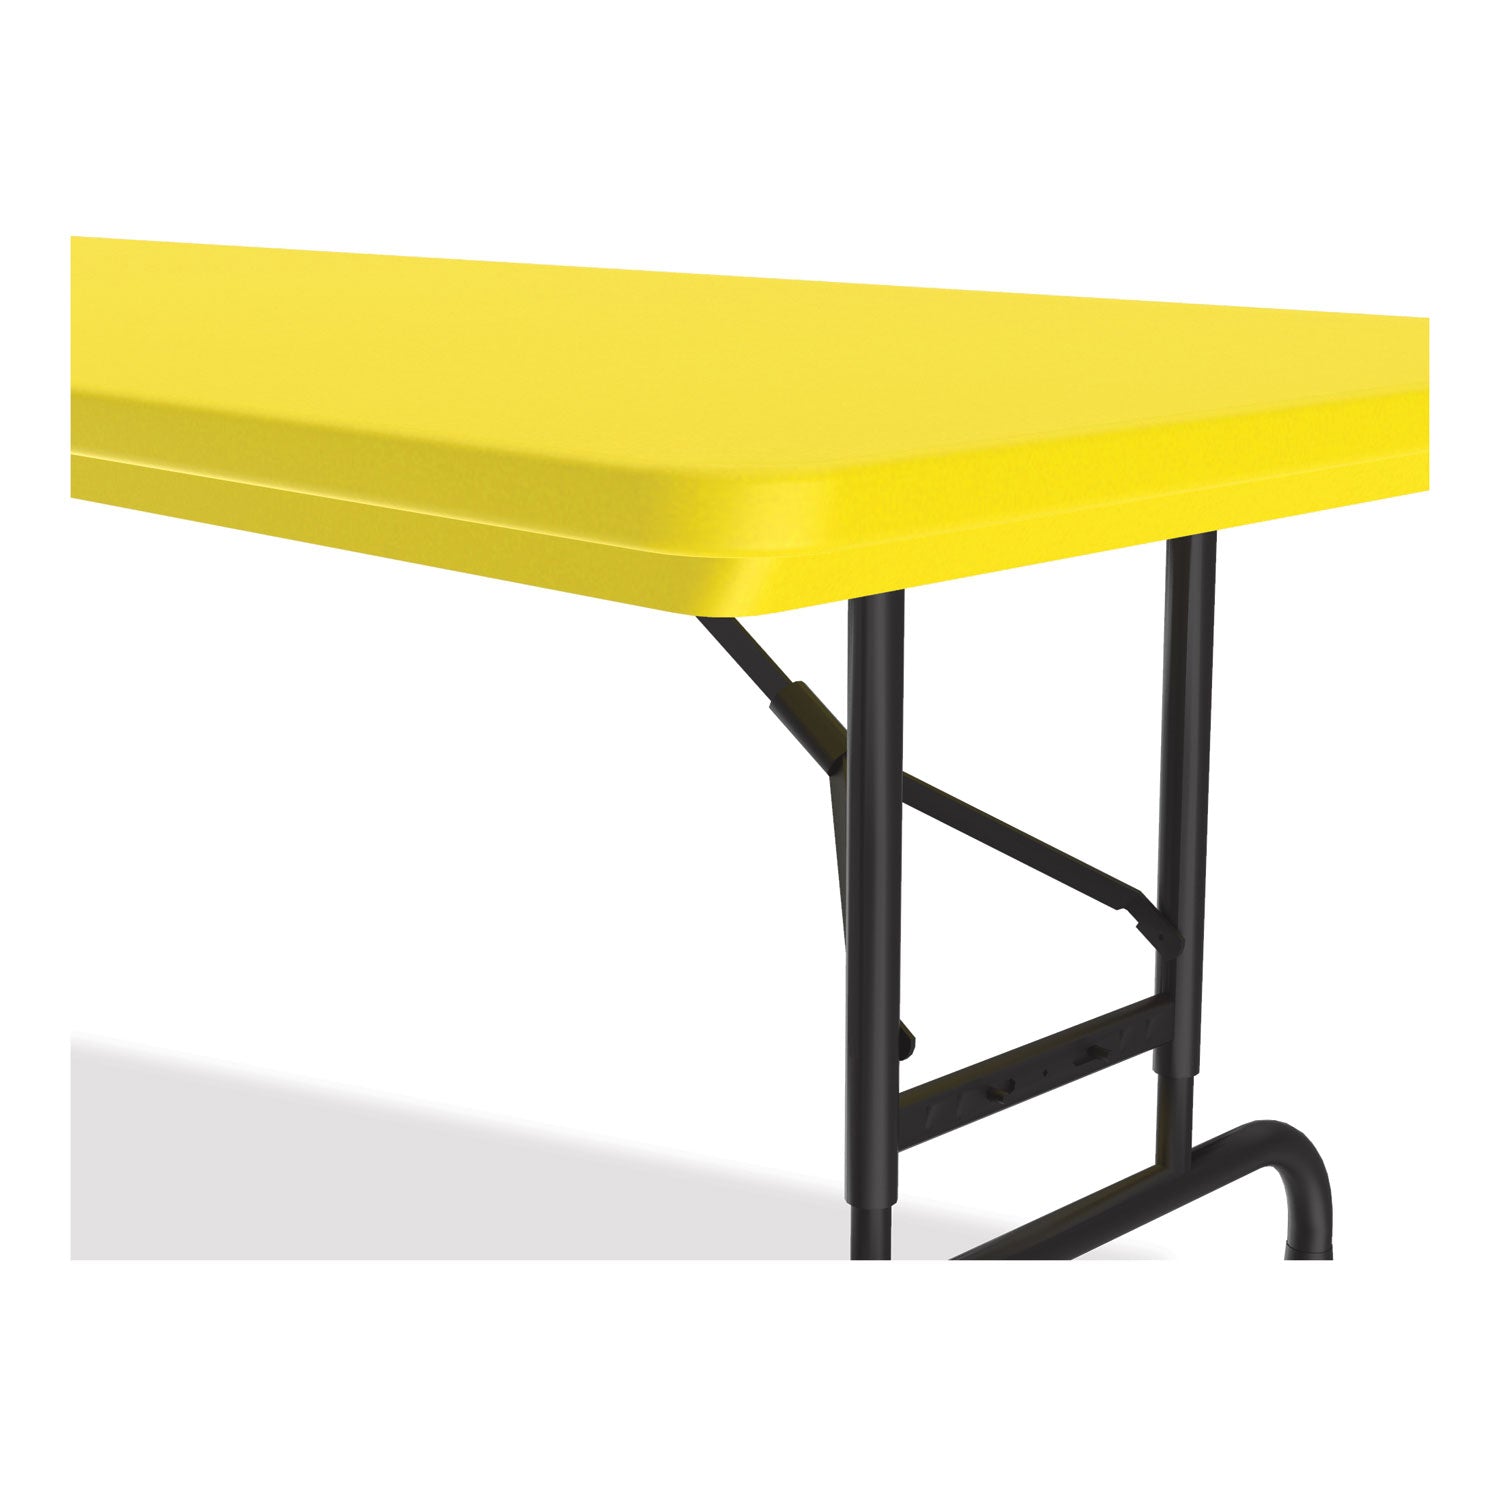 adjustable-folding-tables-rectangular-72-x-30-x-22-to-32-yellow-top-black-legs-4-pallet-ships-in-4-6-business-days_crlra3072284p - 3